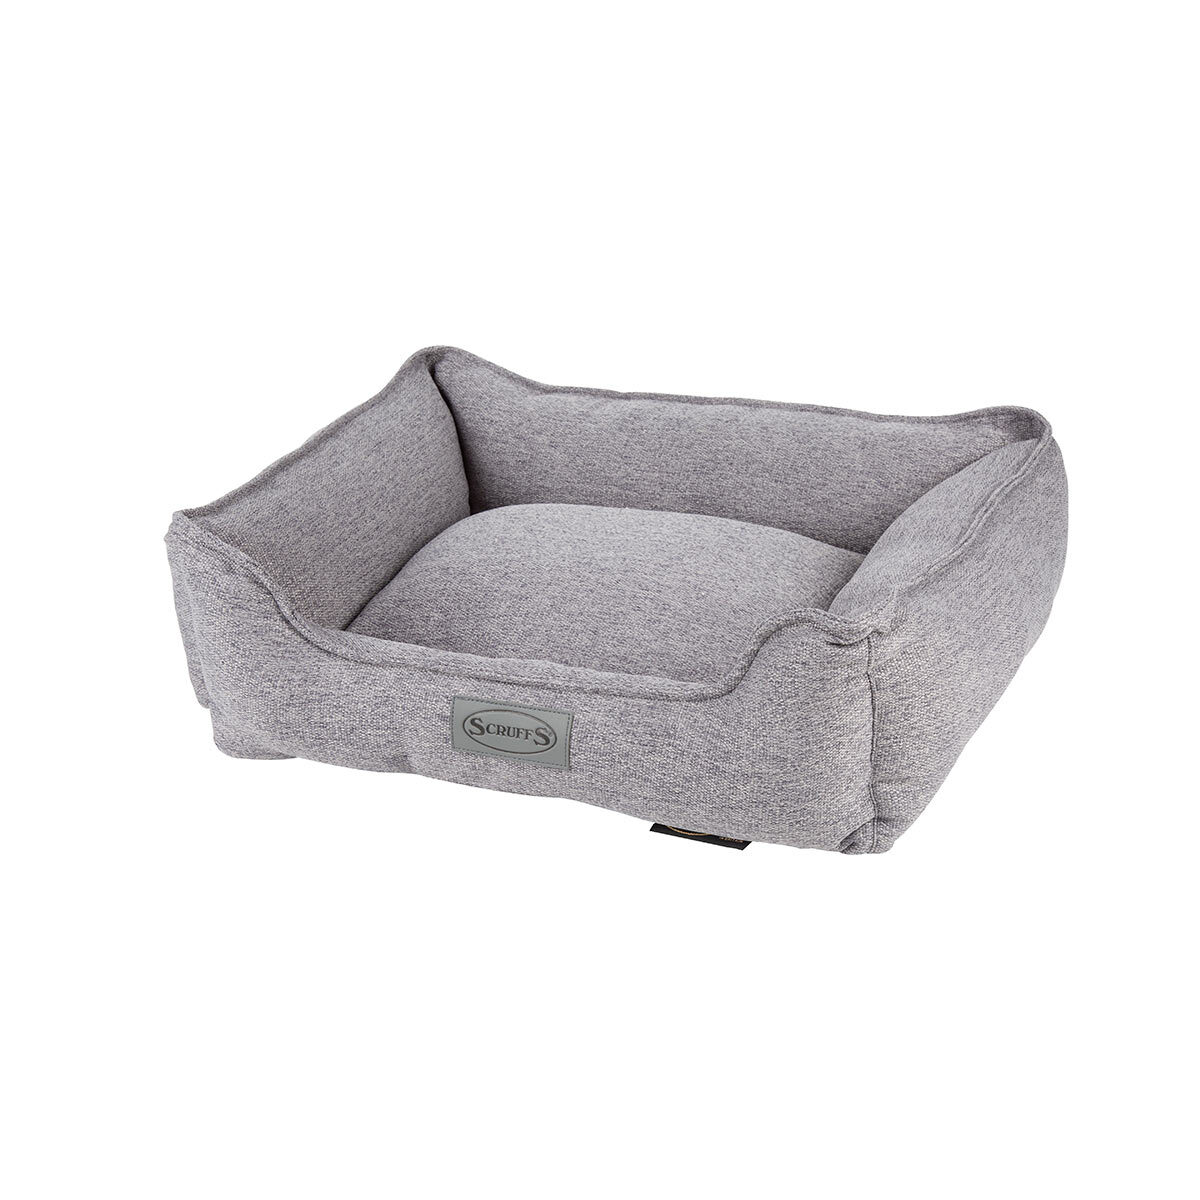 Cut out image of pet bed on white background